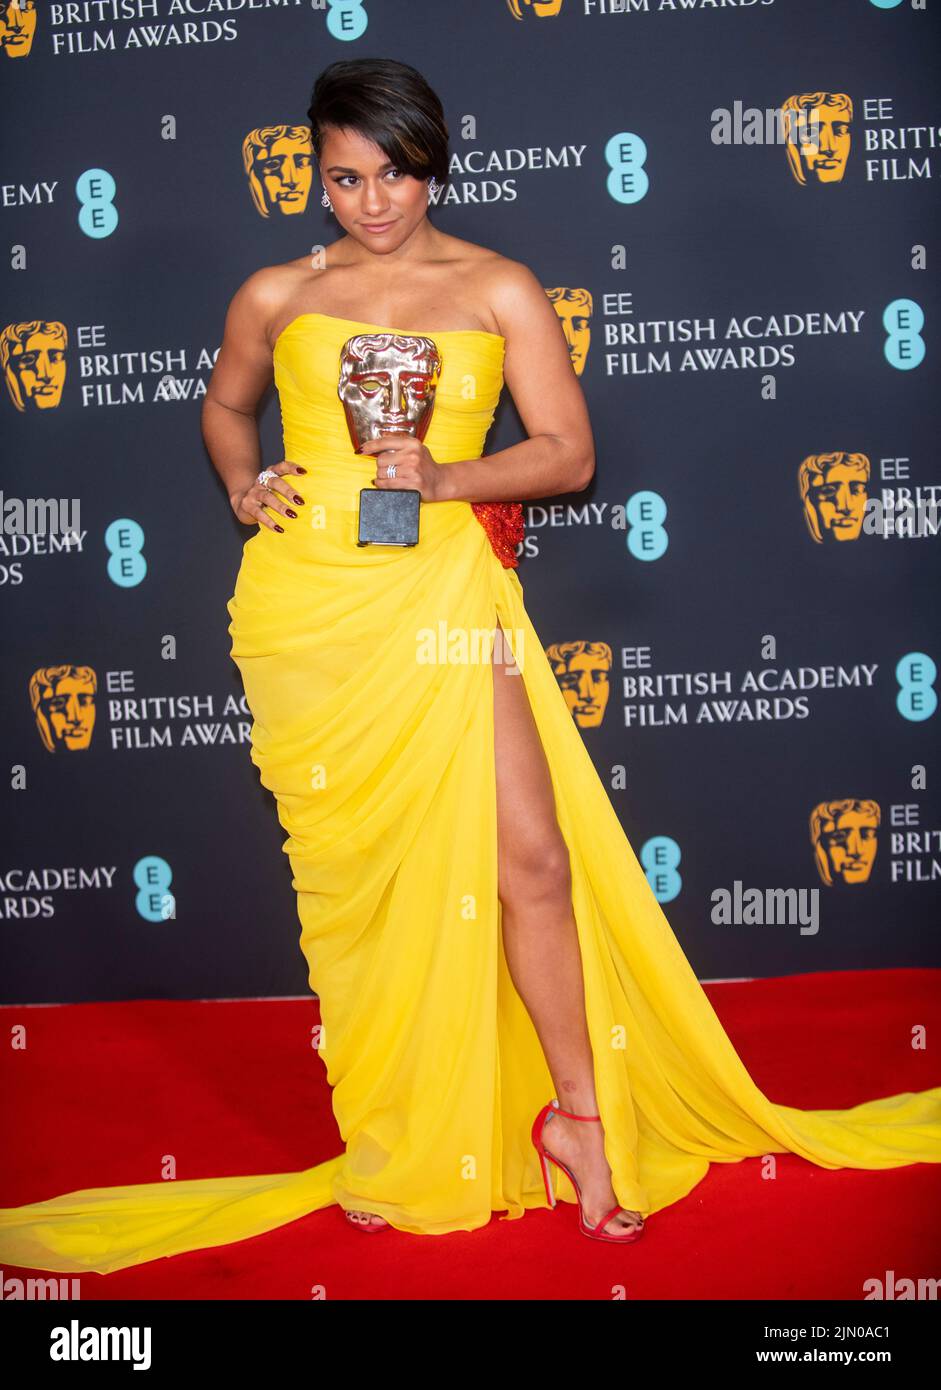 BAFTA Film Awards 2022: The Best Afterparty Outfits